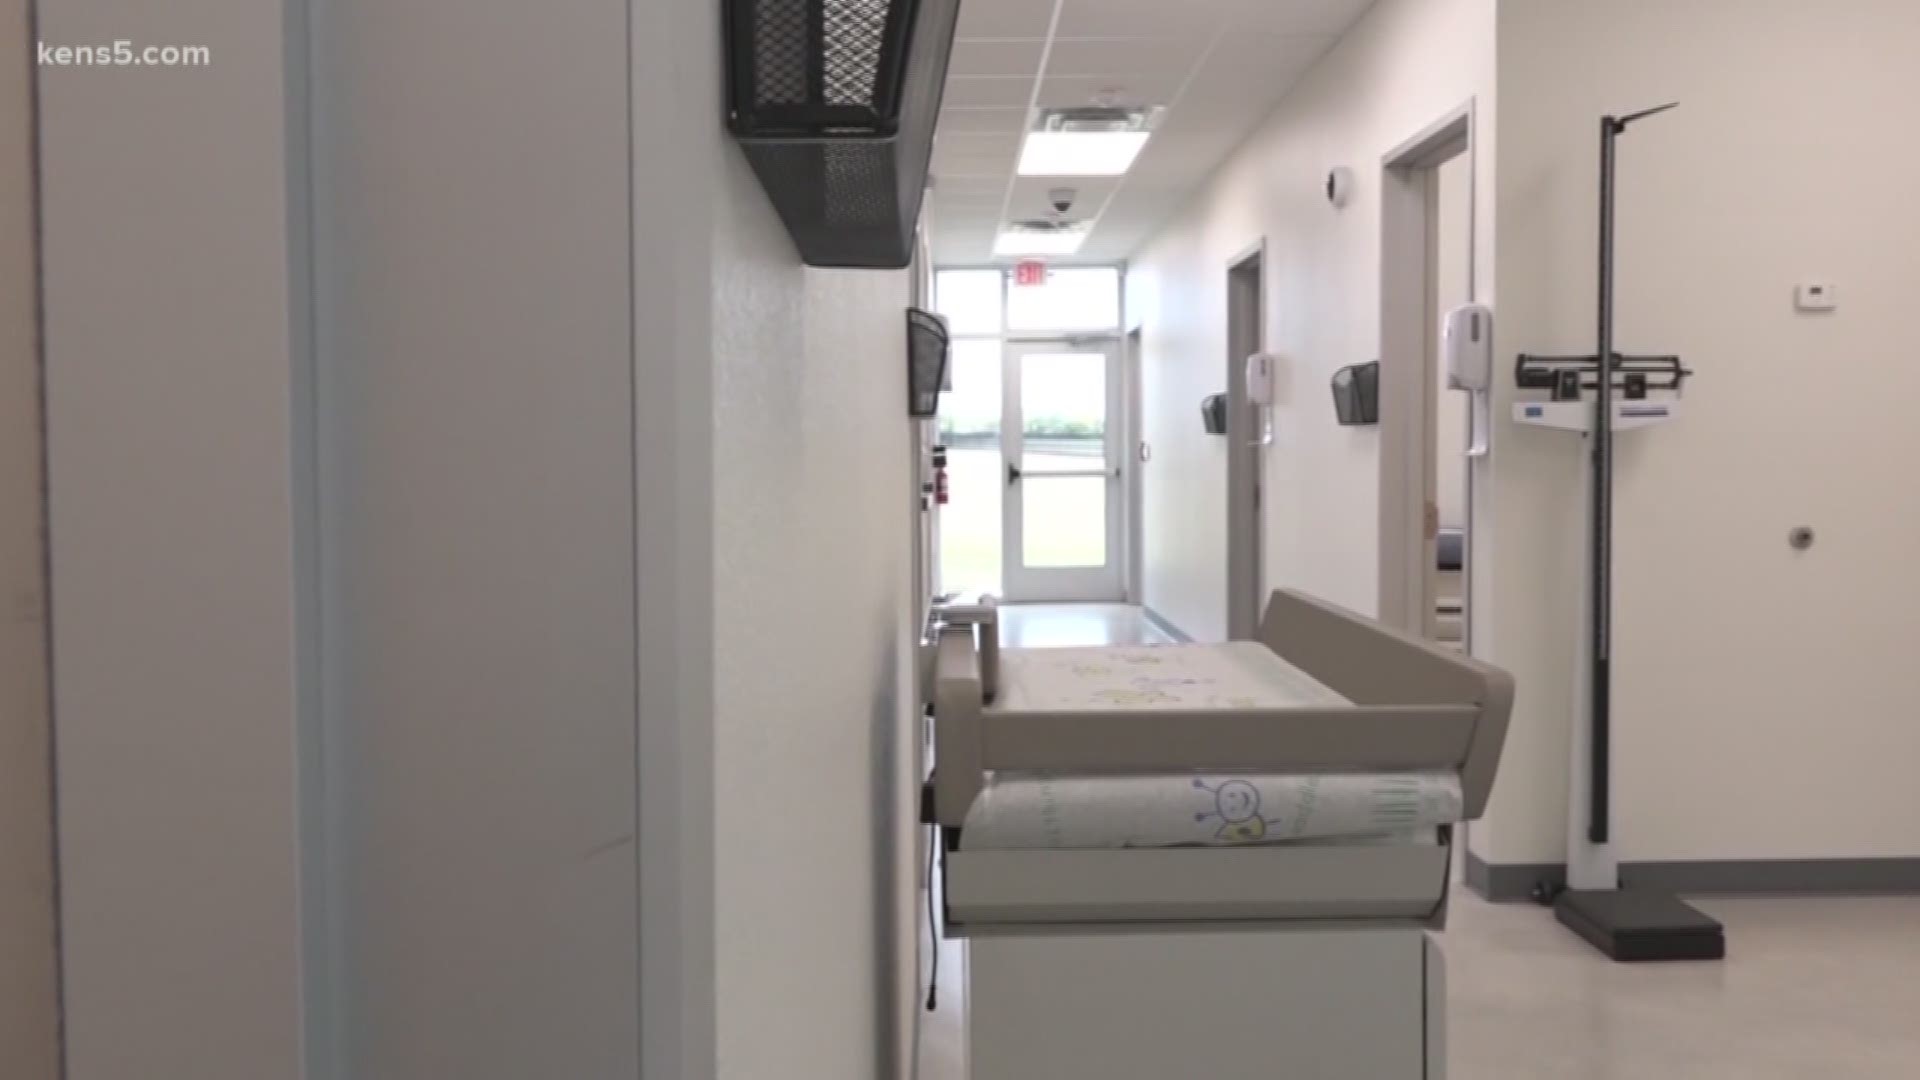 After a few years of preparation, the new health clinic officially opened for business for students, teachers and other community members on the city's south side.